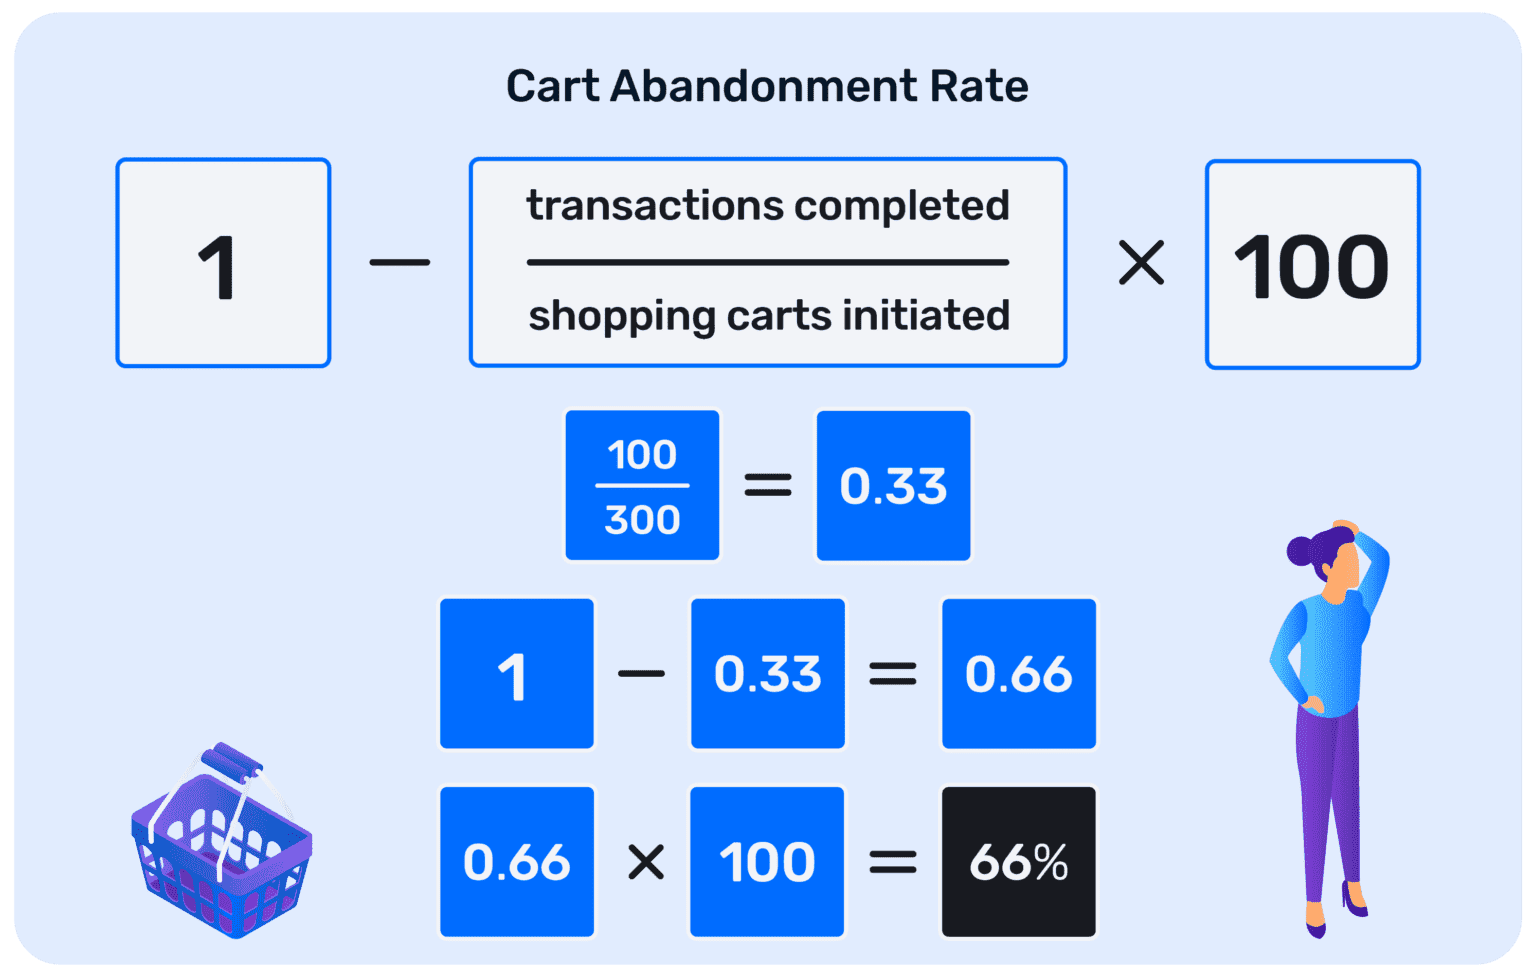 How to calculate cart abandonment rate